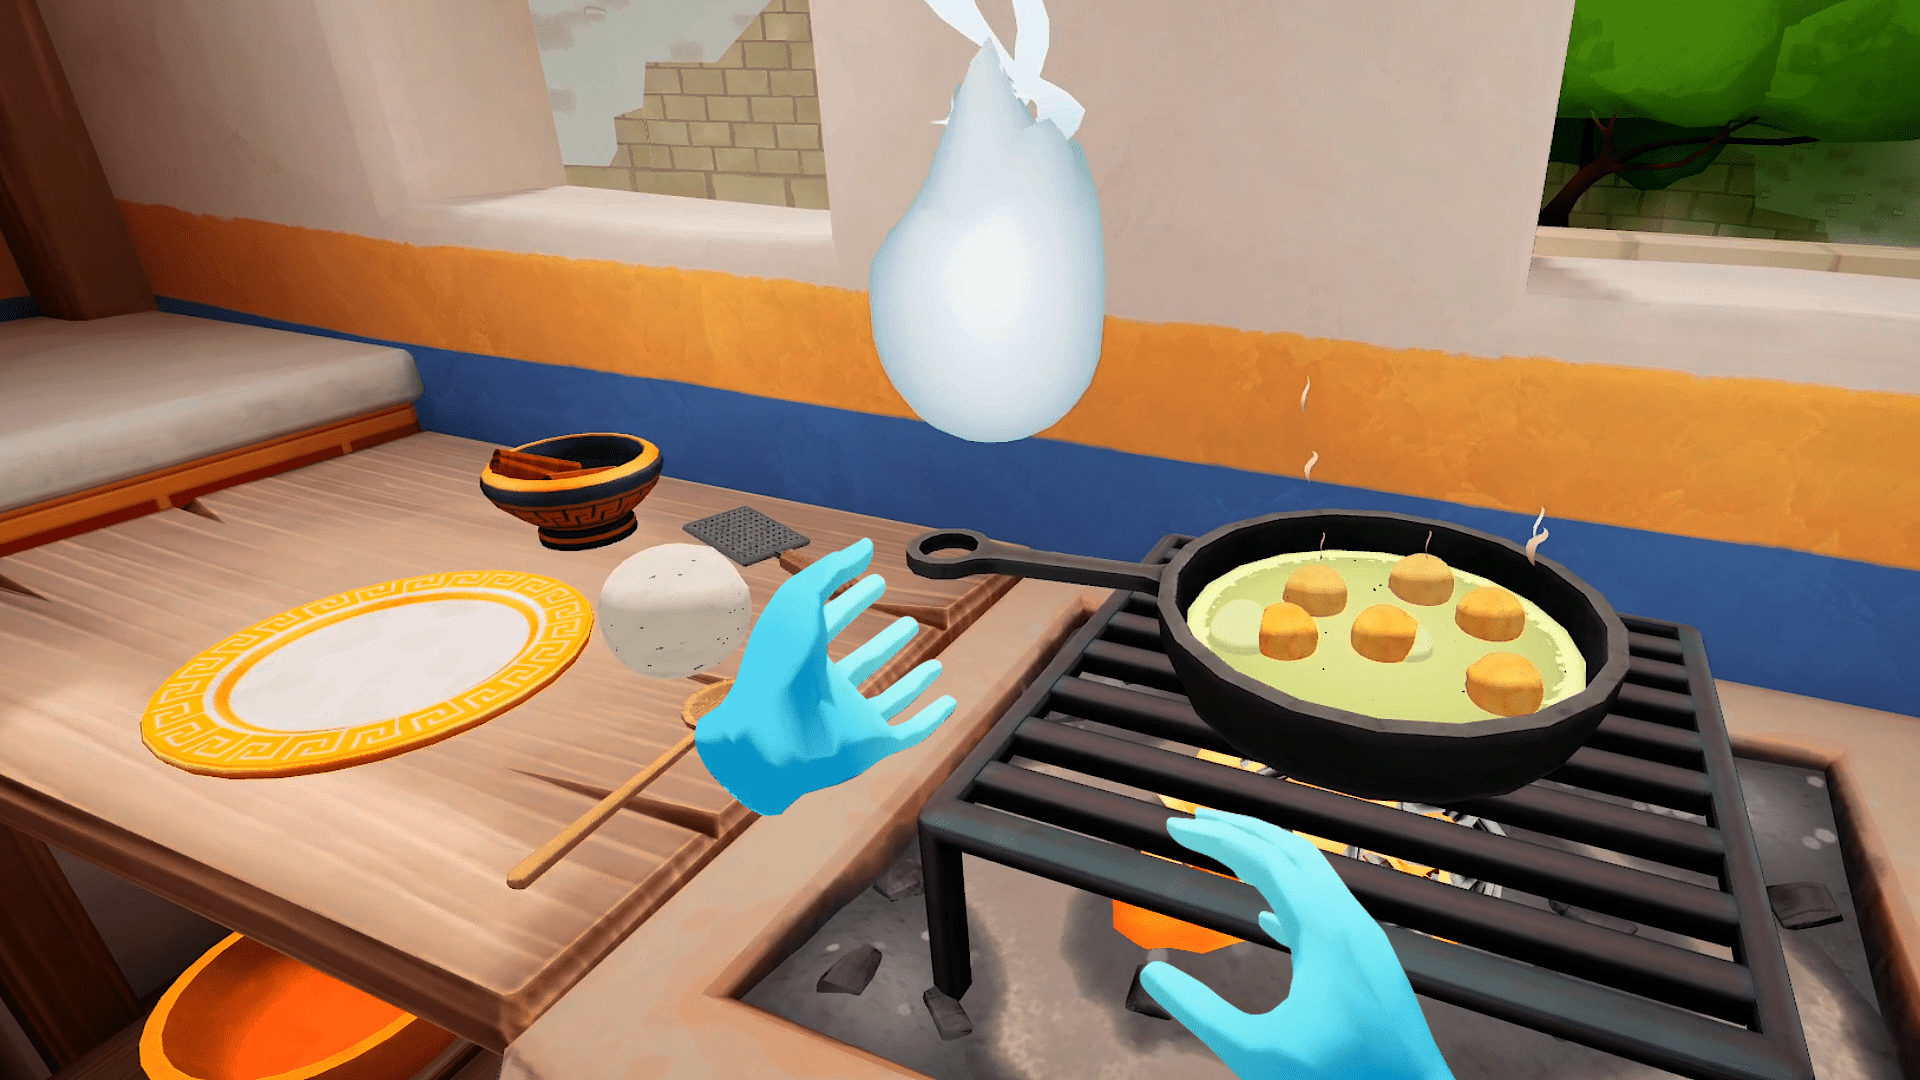 Upcoming VR Game Lost Recipes Has You Cooking For Ghosts - VRScout